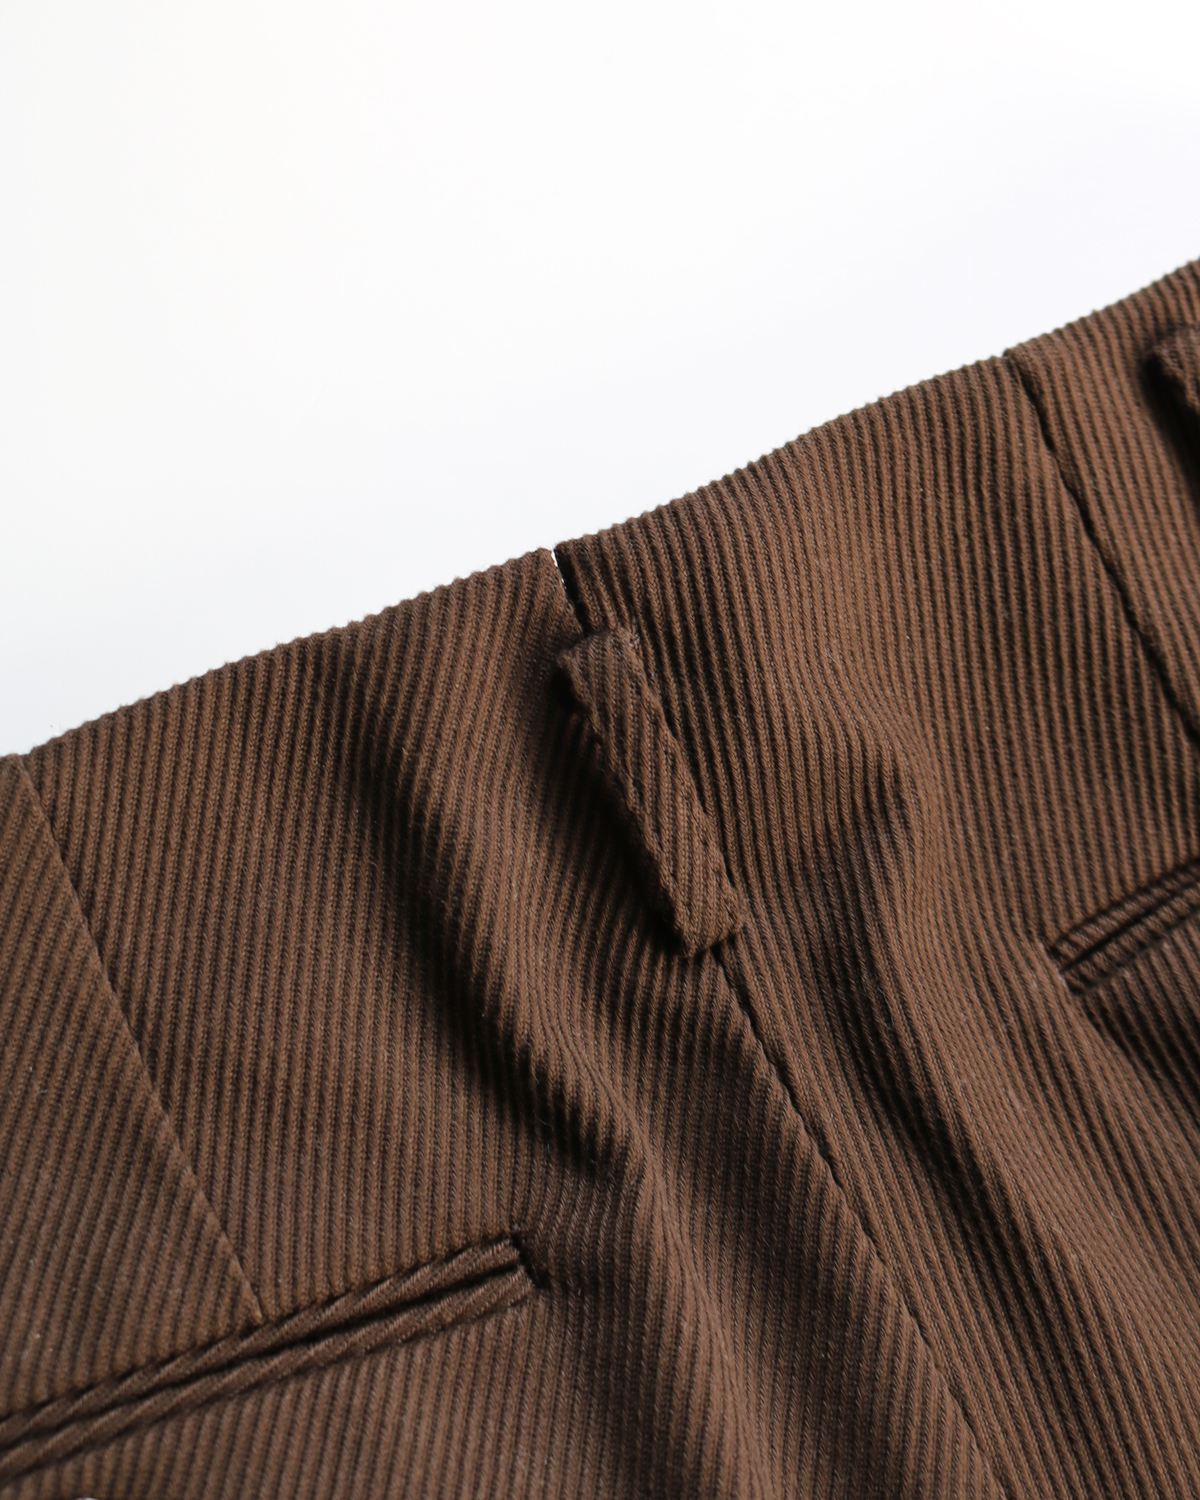 NEAT｜Cotton Kersey｜BROWN - TONI｜PRODUCT｜Continuer Inc.｜メガネ 